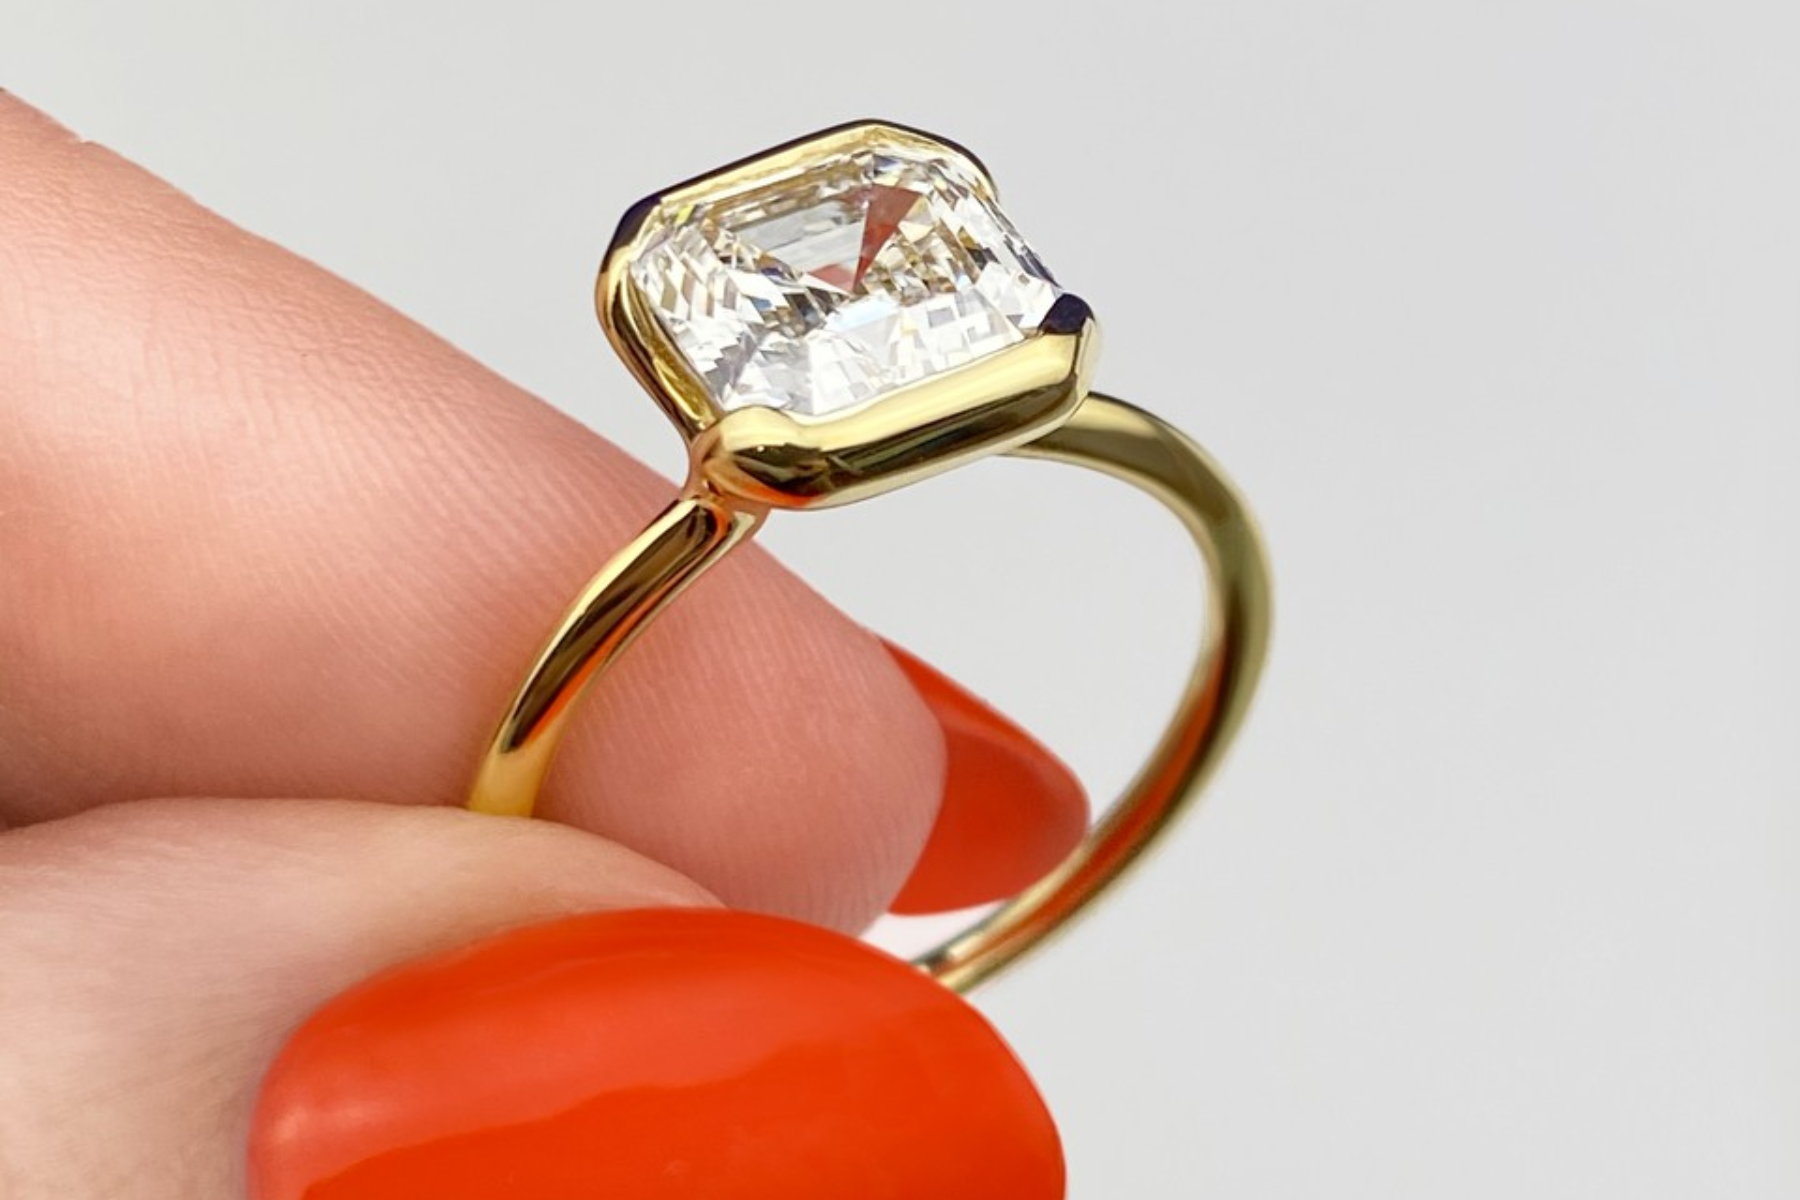 A woman's hand holding a ring in a bezel setting